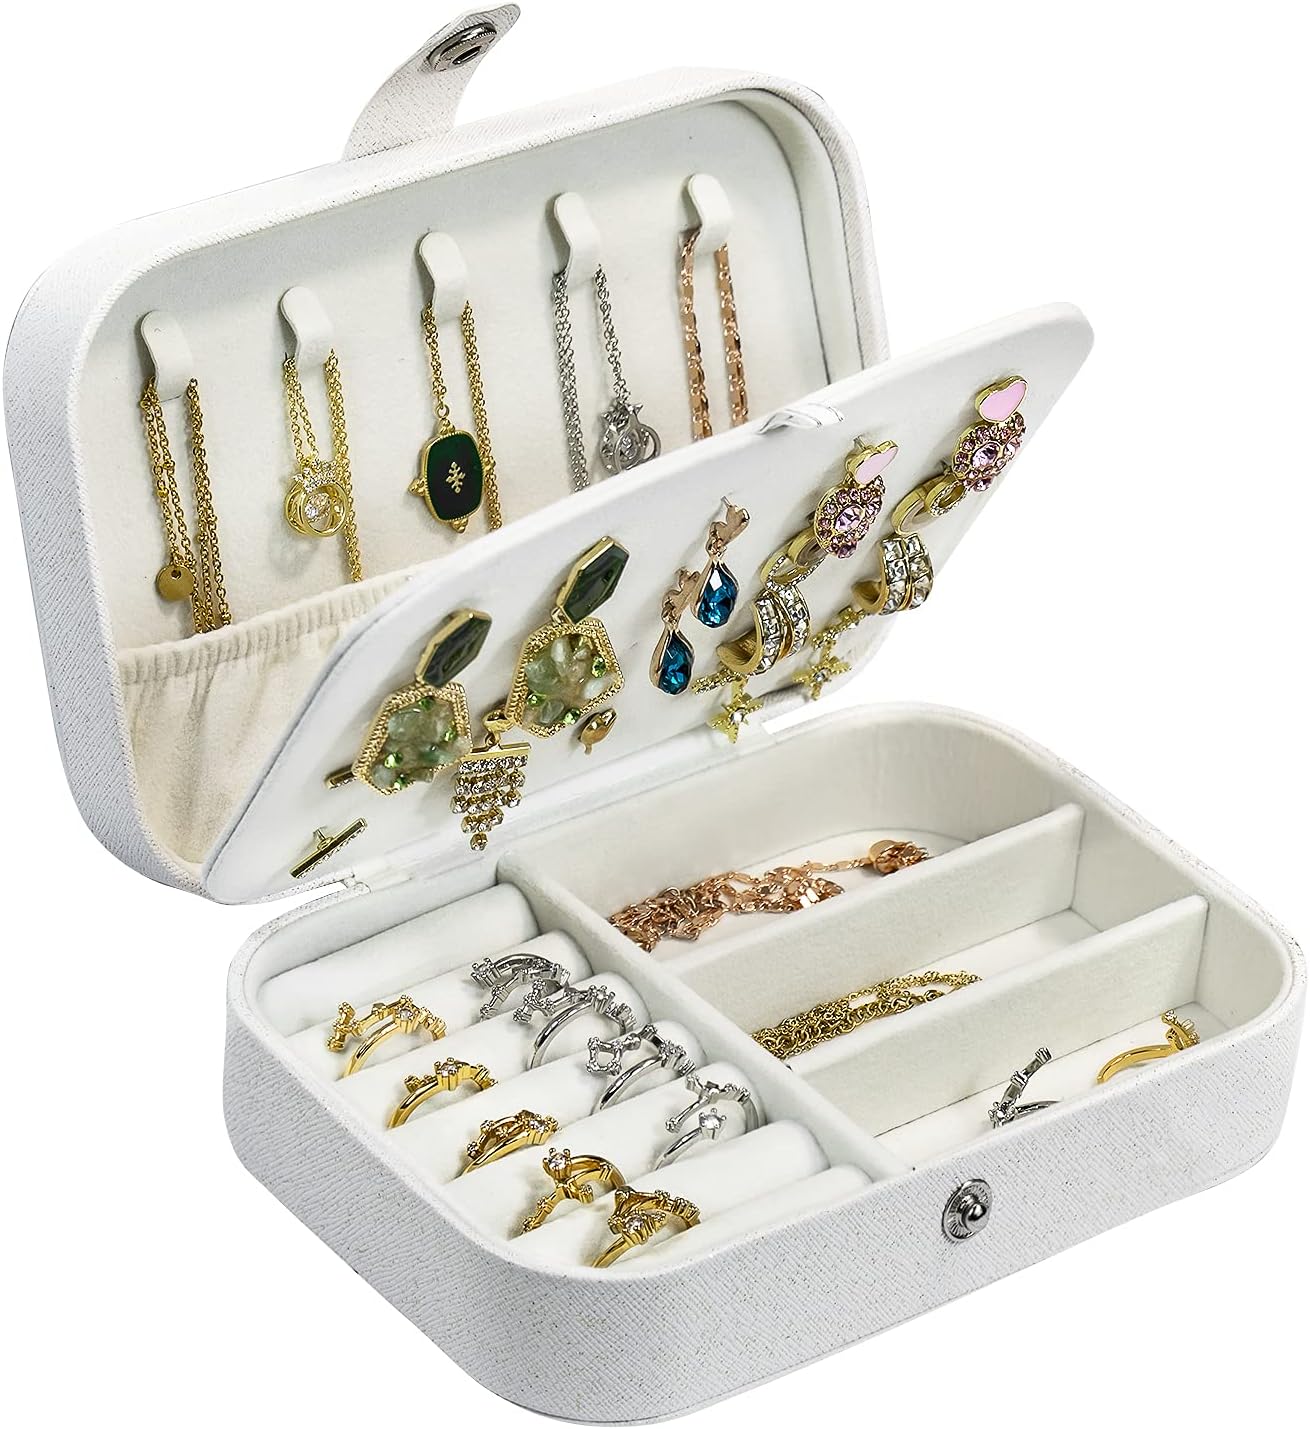 Travel Jewelry Box,PU Leather Small Jewelry Organizer for Women Girls,Portable Mini Travel Case Display Storage Holder Box for Stud Earrings, Rings, Necklaces, Bracelets (Glitter White)